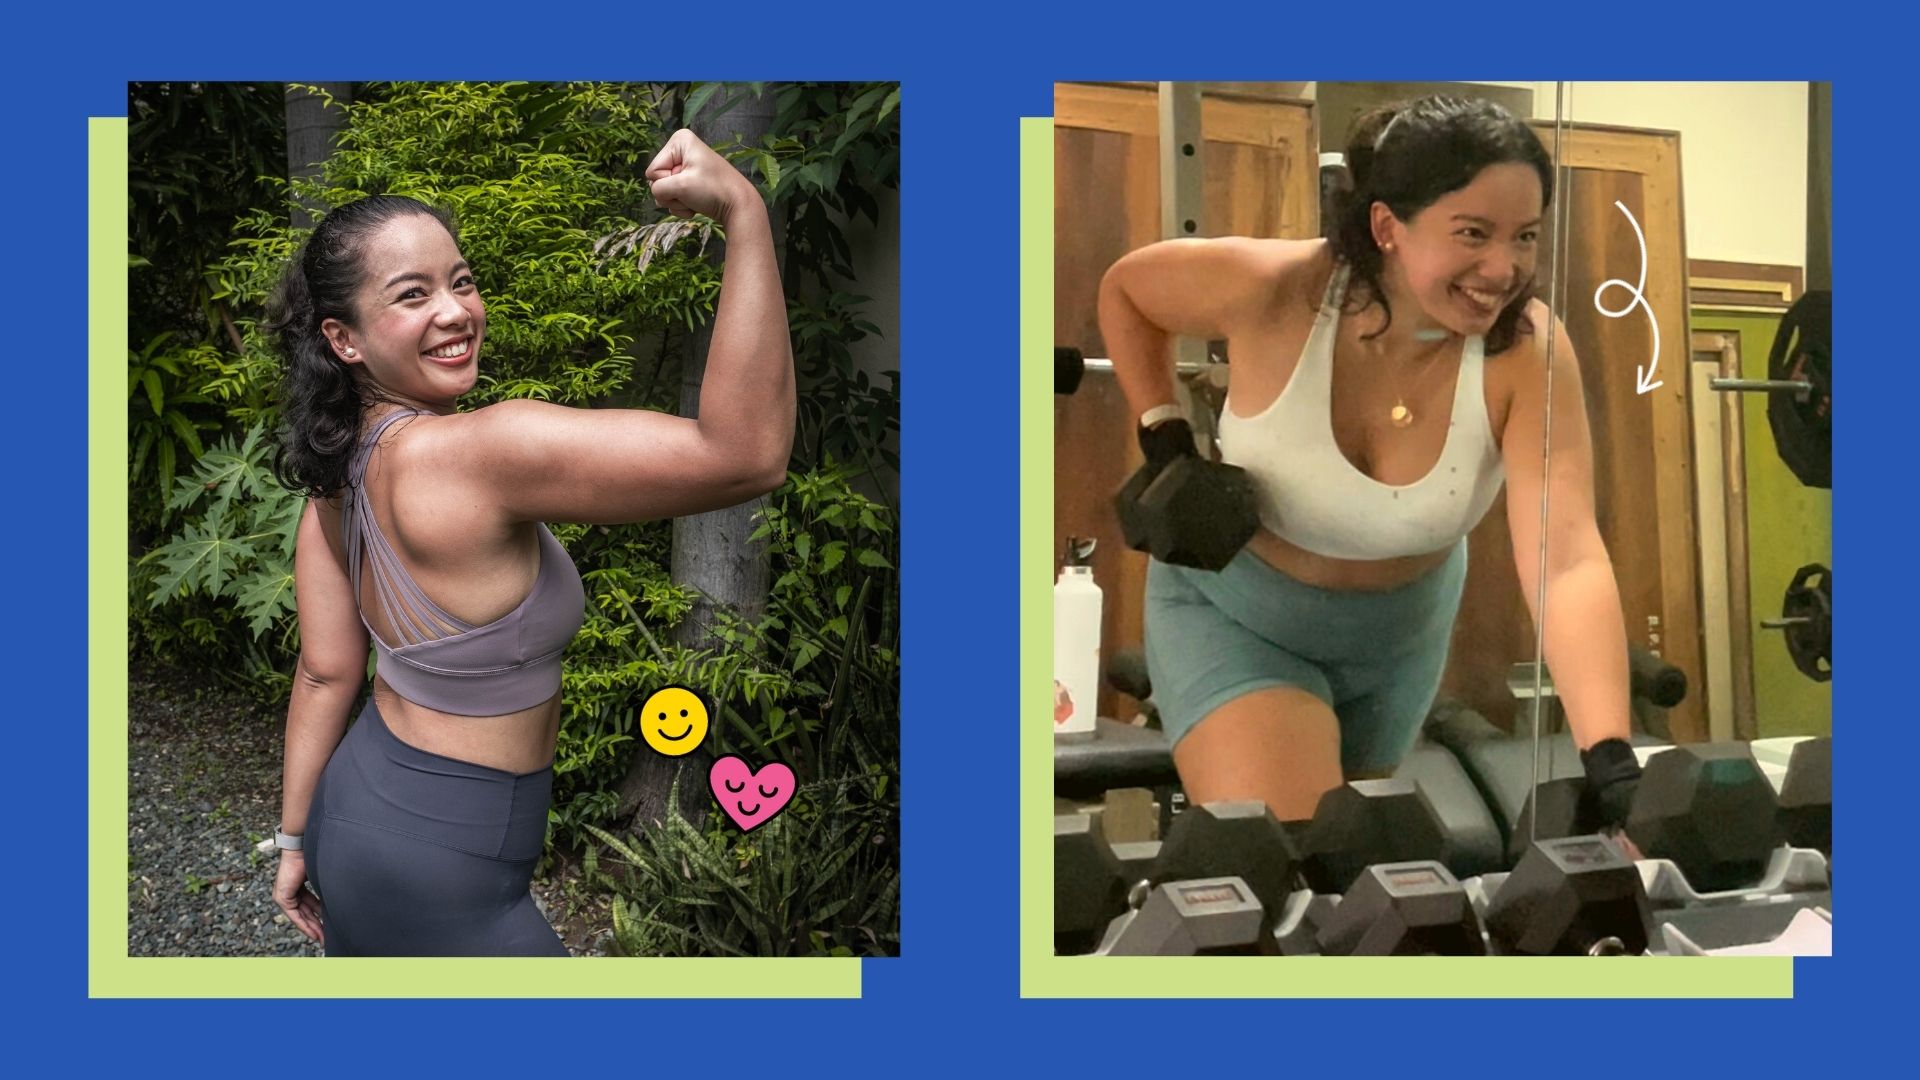 Pinay shares how lifting weights helps her become empowered